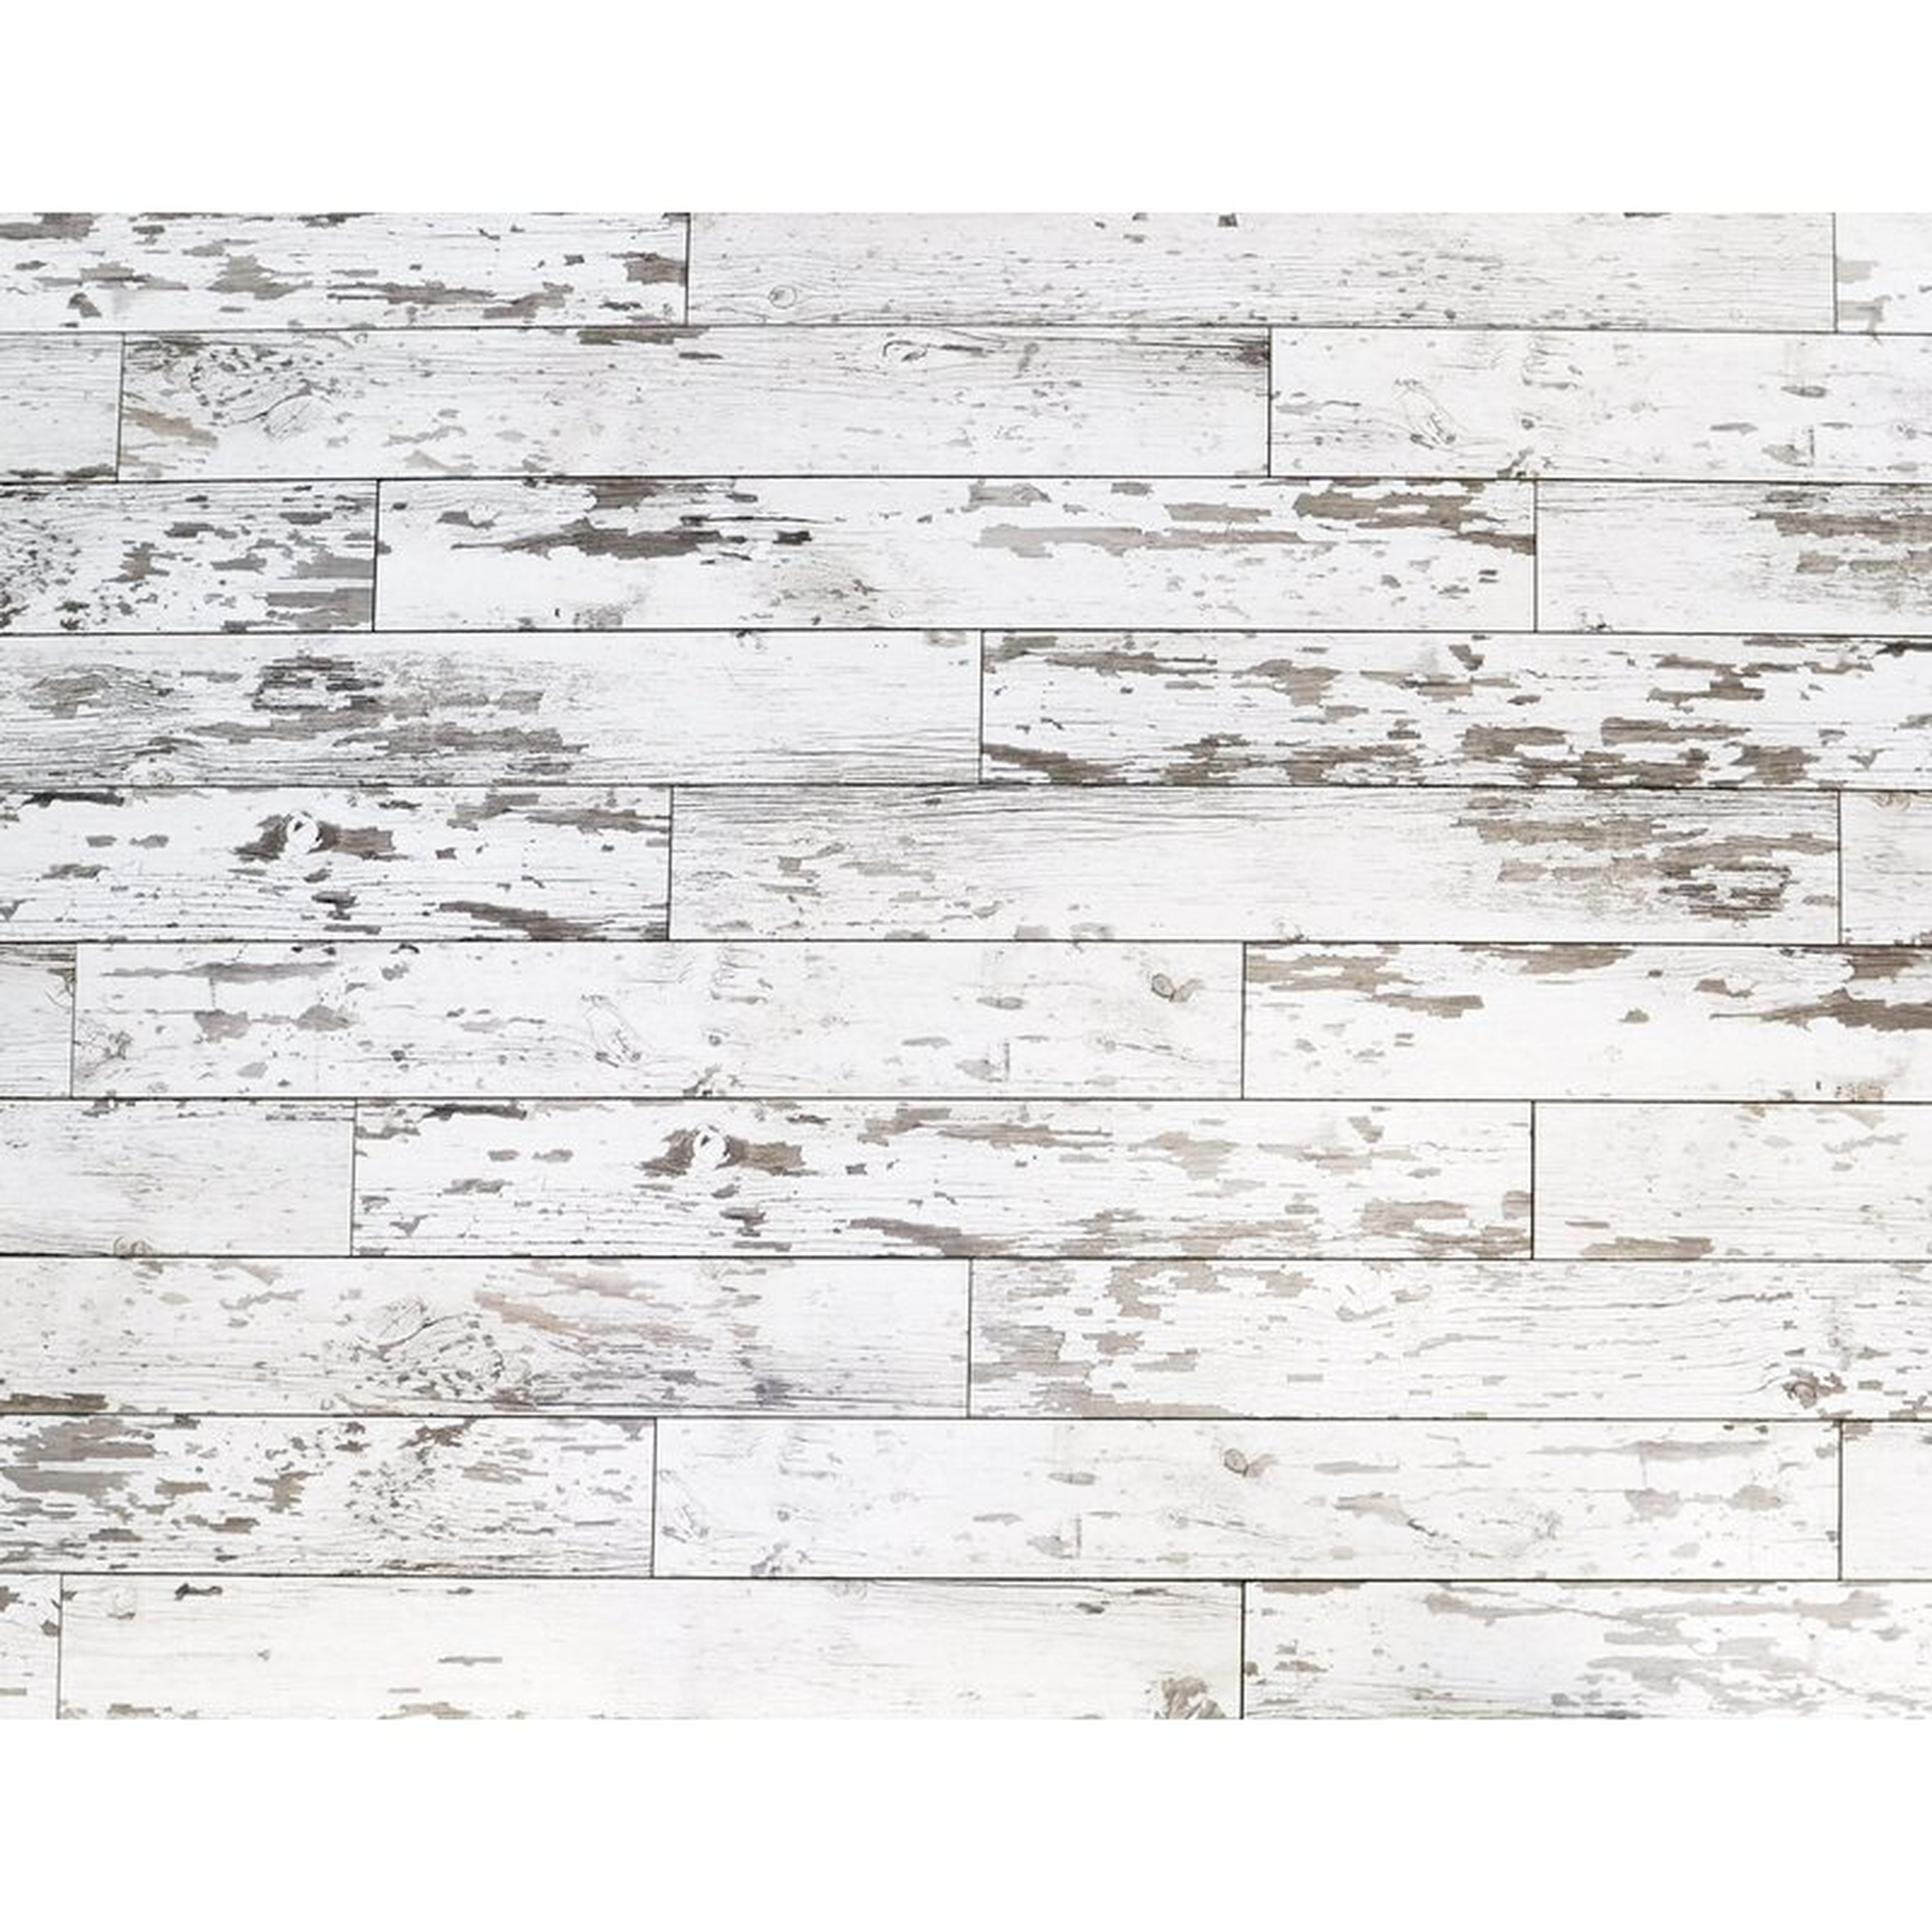 Rendition 6.5" Peel and Stick Laminate Wall Paneling  Rendition 6.5" Peel and Stick Laminate Wall Paneling  Rendition 6.5" Peel and Stick Laminate Wall Paneling  Rendition 6.5" Peel and Stick Laminate Wall Paneling  Rendition 6.5" Peel and Stick Laminate  - Wayfair